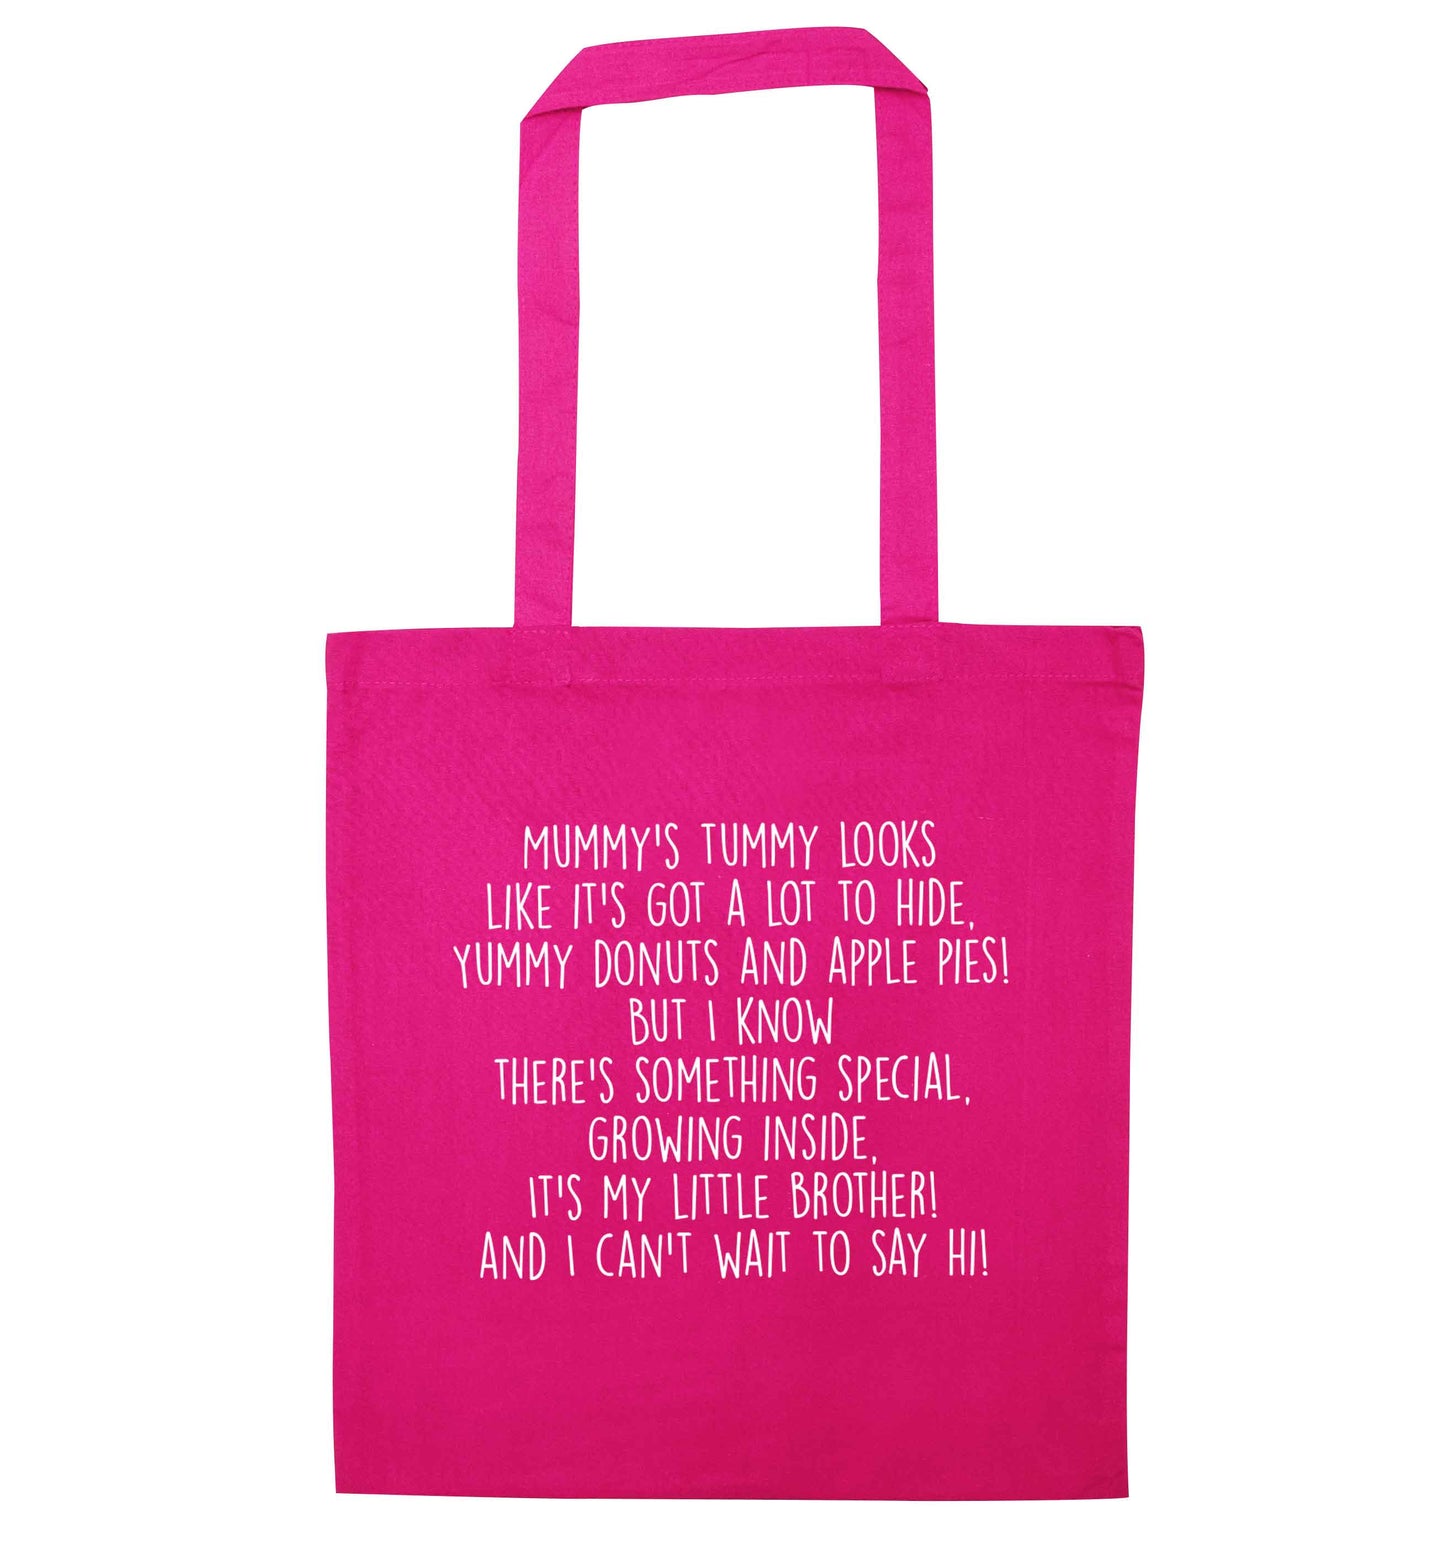 Something special growing inside it's my little brother I can't wait to say hi! pink tote bag